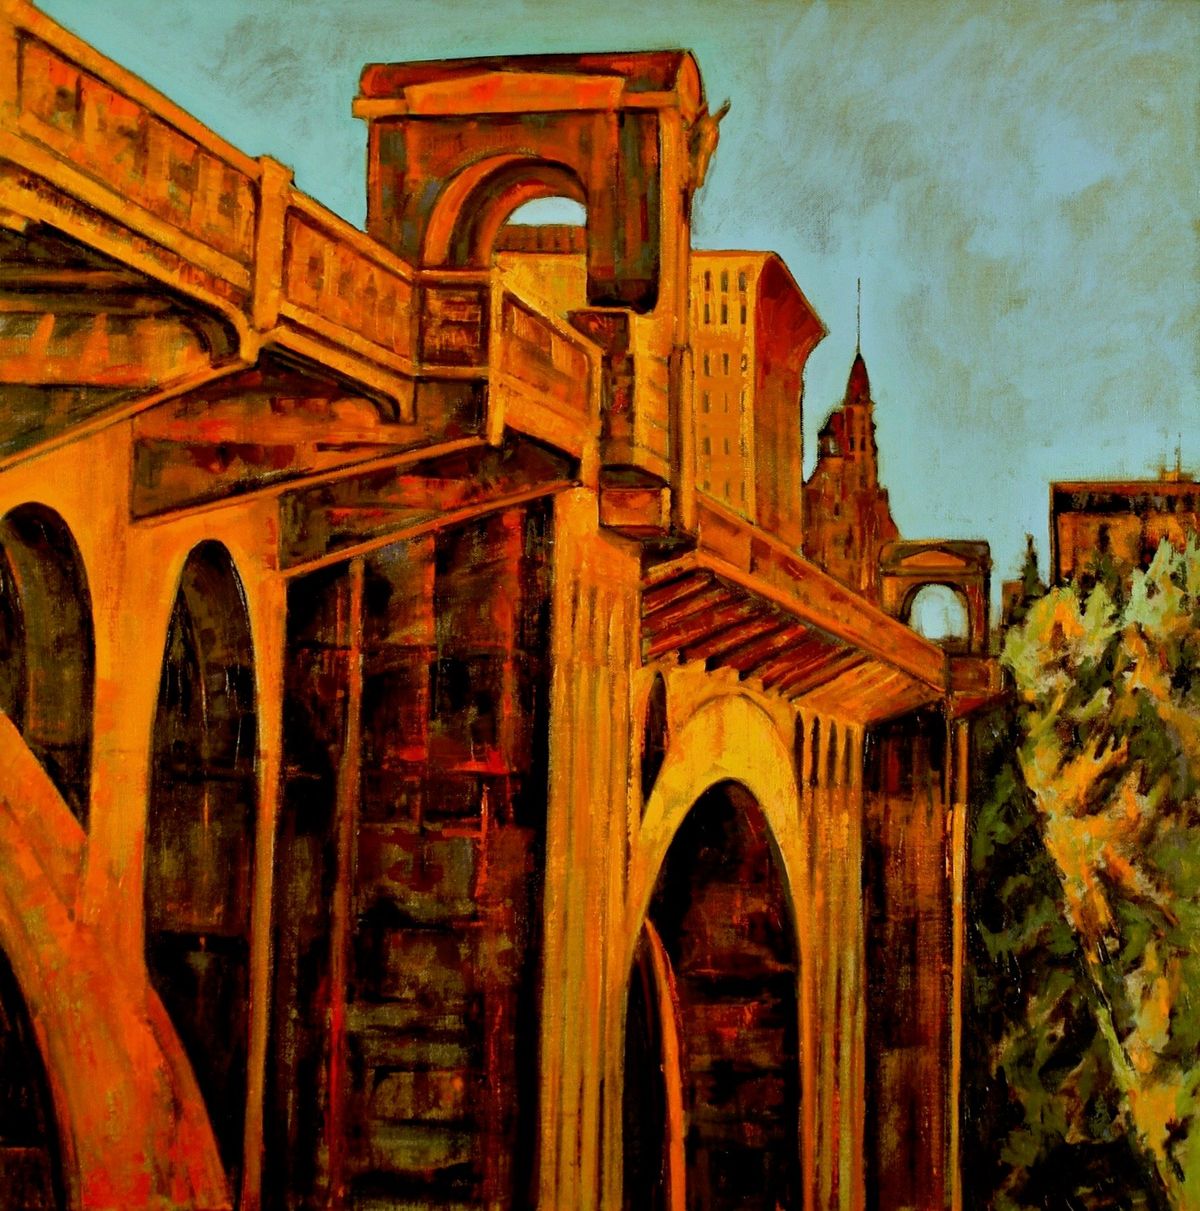 This view of the Monroe Street Bridge is among those painted by Gordon Wilson and featured in his show at Marmot Art Space in Kendall Yards.  (Courtesy photo)